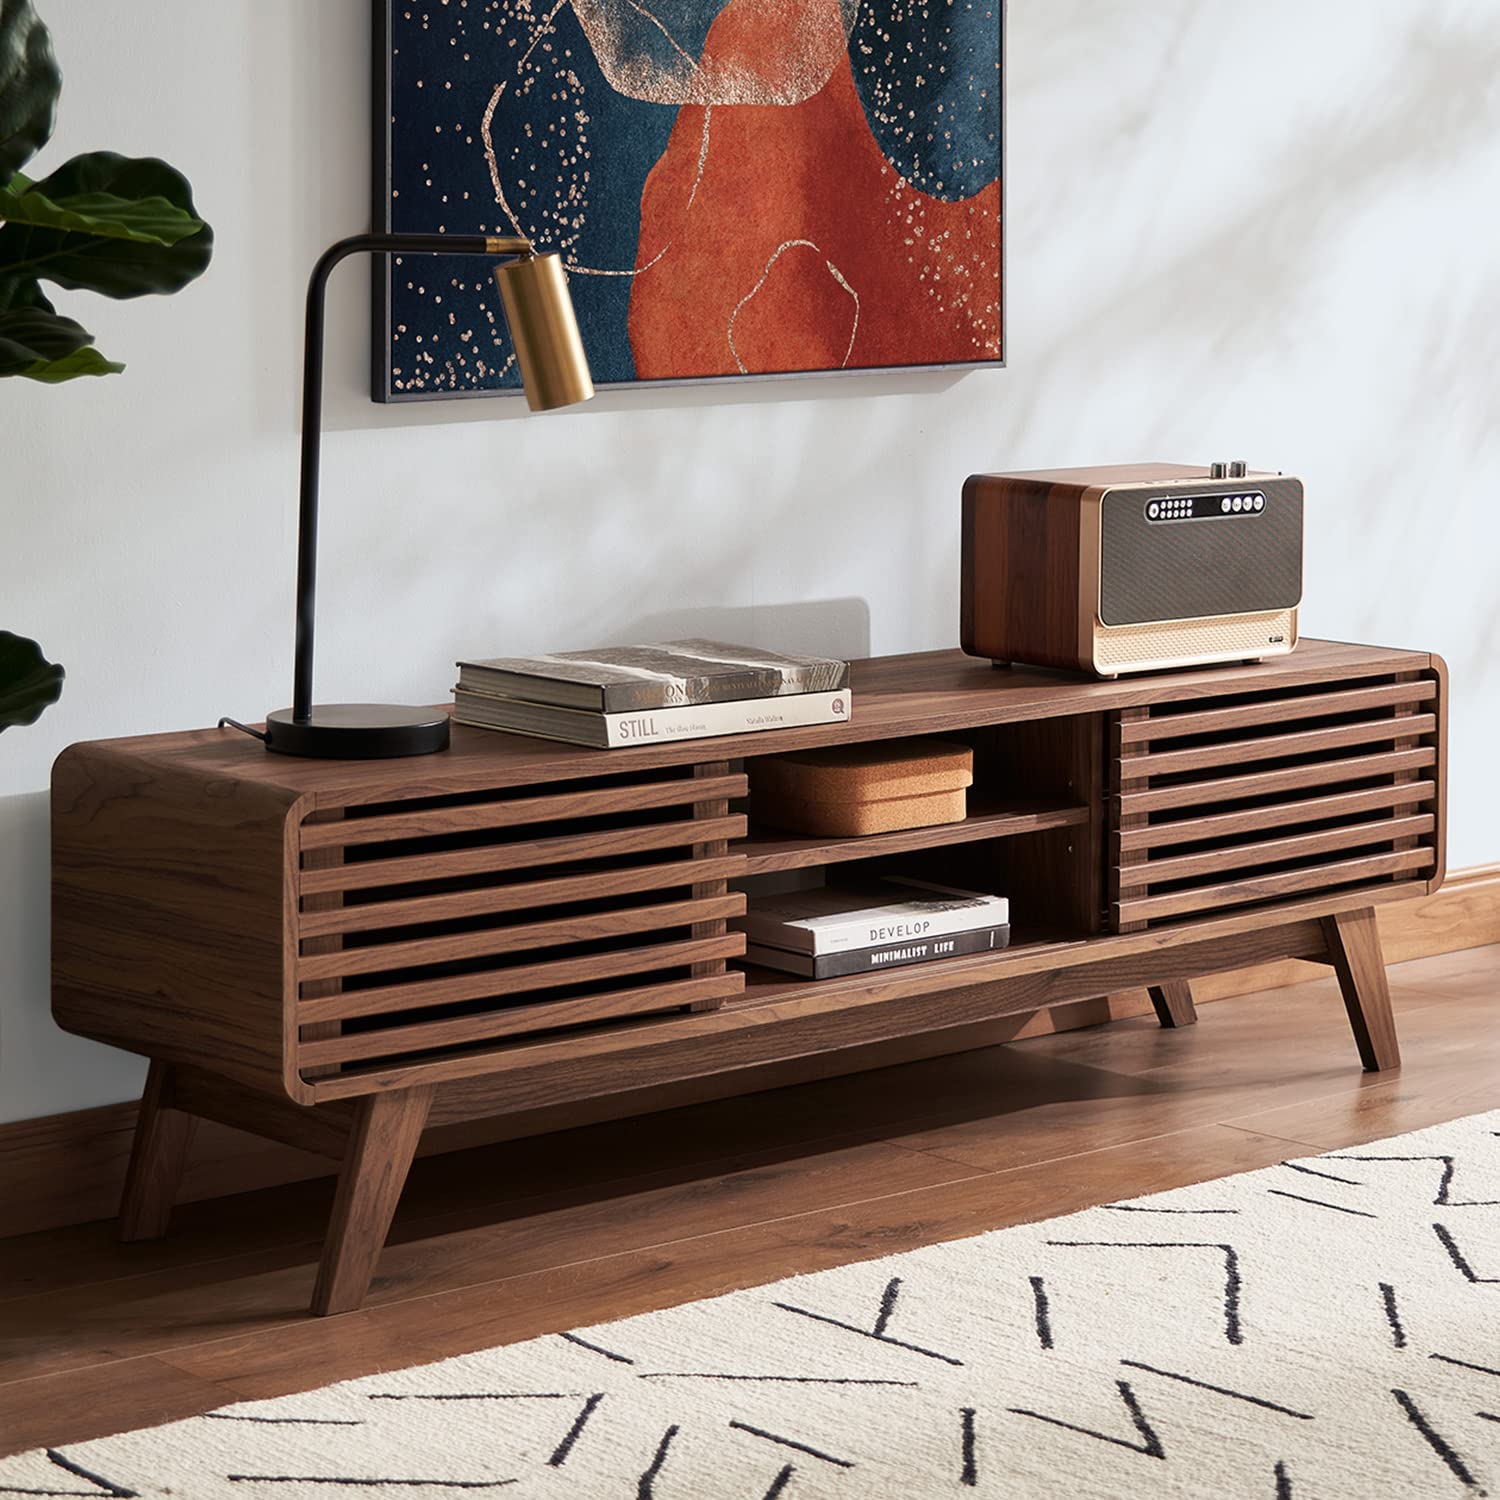 Mopio Ensley 59" Low Mid-Century Modern TV Stand Console for TV Under 70" - image 1 of 7